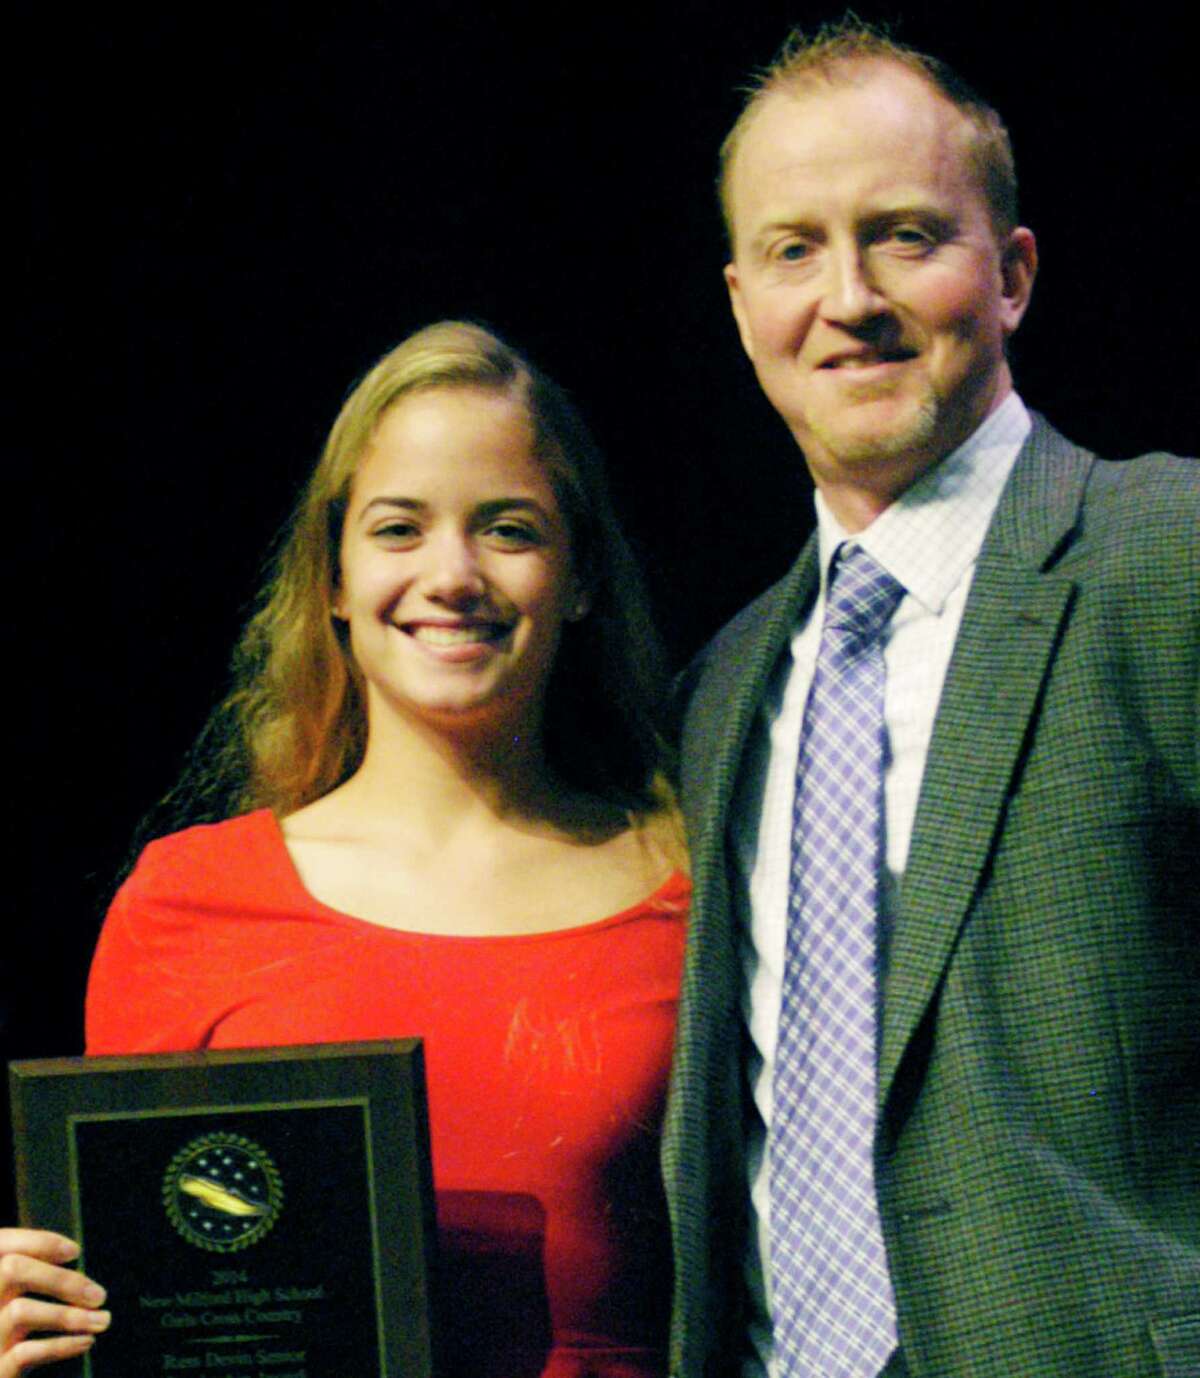 Nicole McCarthy is presented her team's Russell Devin Award by Green Wave girls' cross country coach Giles Vaughan during New Milford High School's annual fall sports awards ceremony, Dec. 1, 2014. The award is given each year to a standout senior in memory of Devin, the legendary Green Wave cross country and track coach.